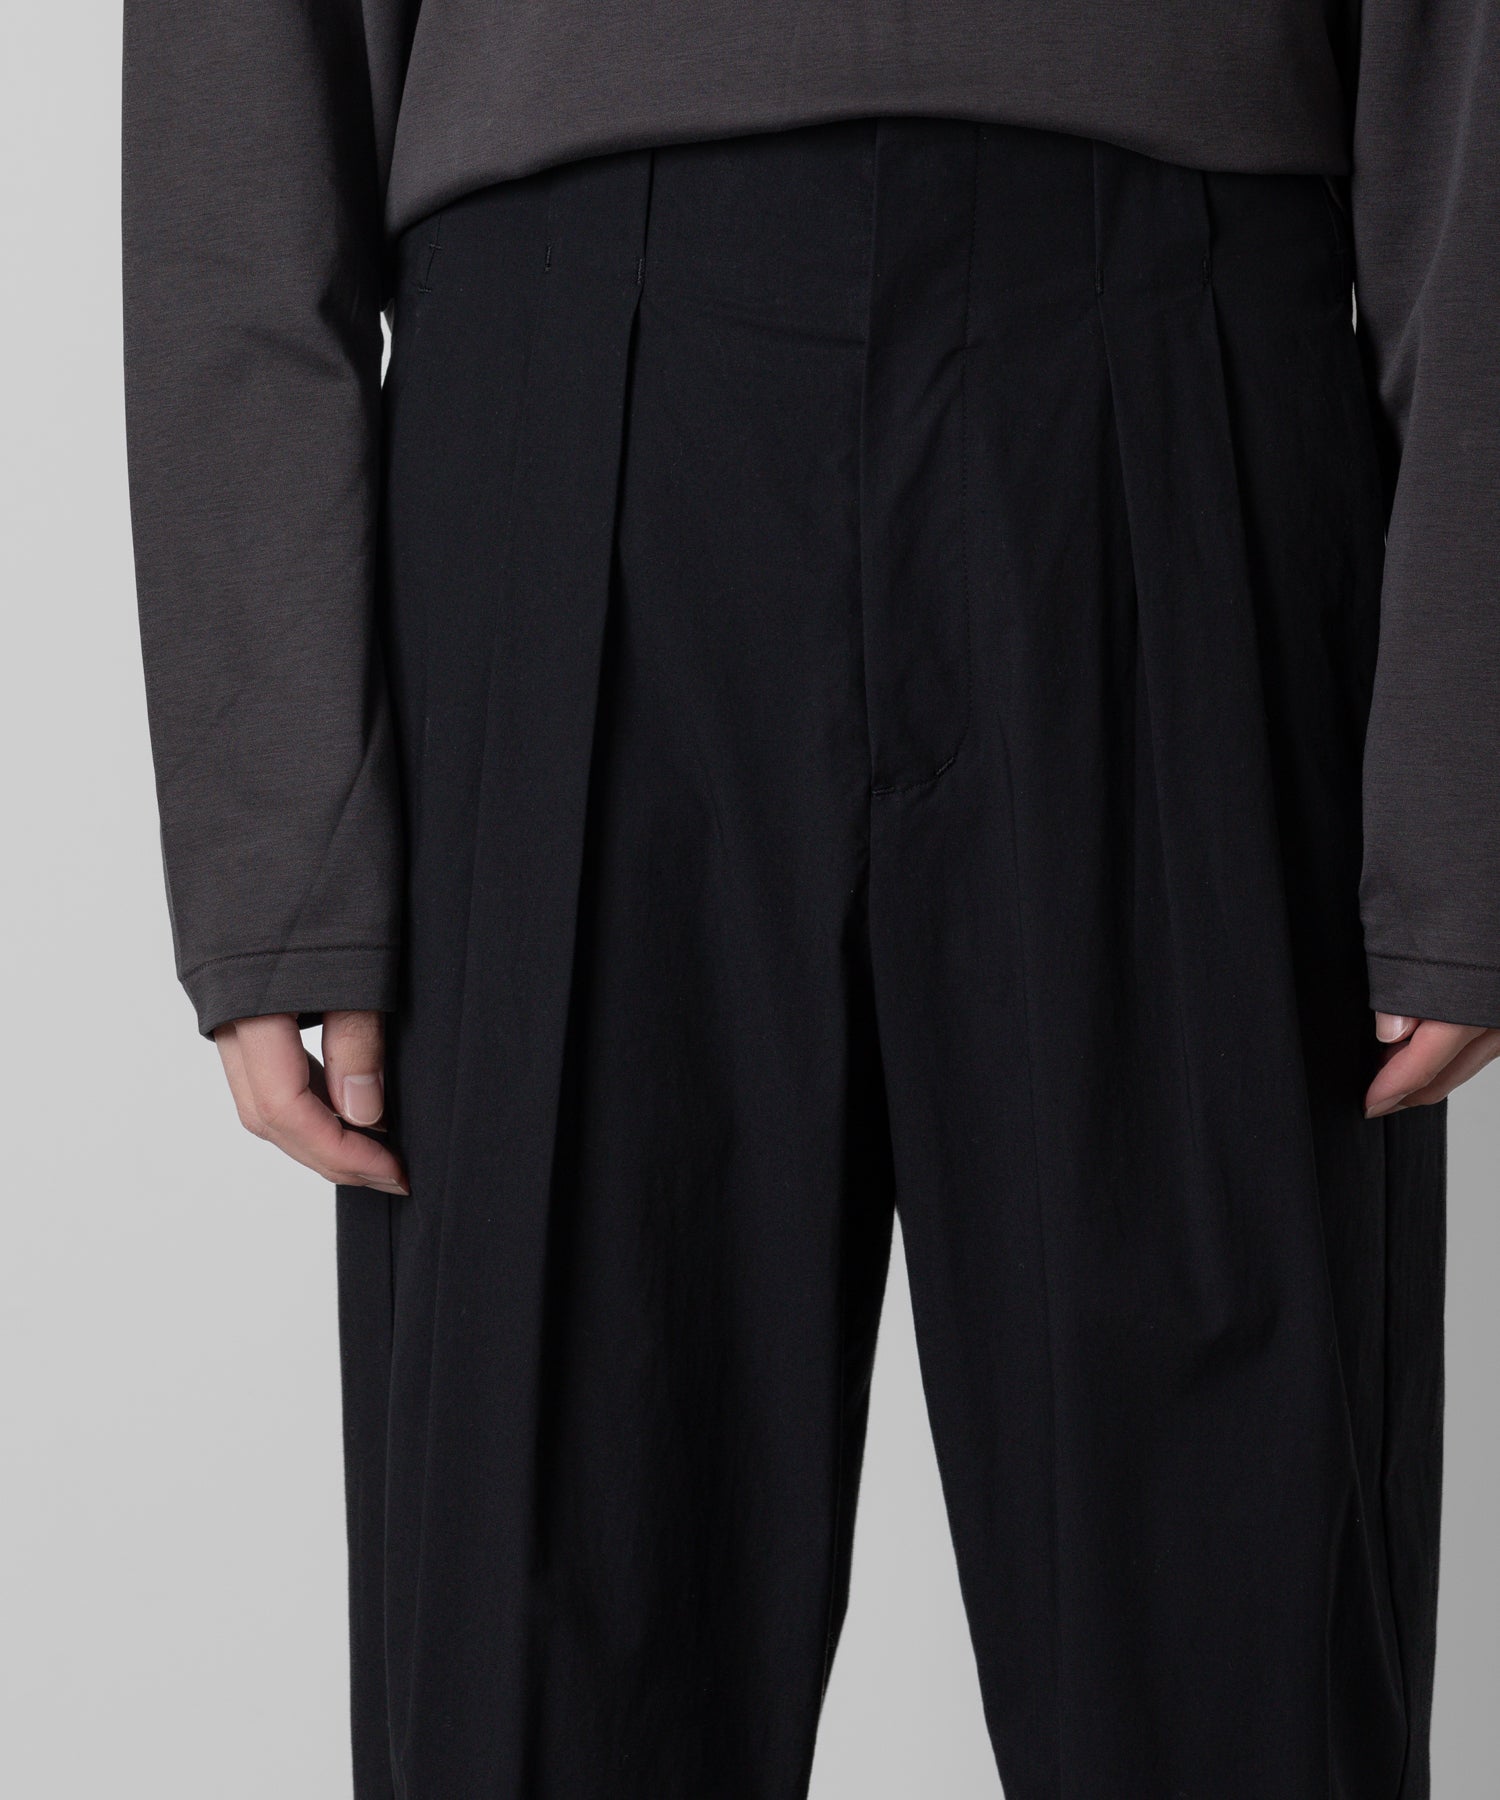 【ATTACHMENT】ATTACHMENT アタッチメントのCO STRETCH TYPEWRITER TAPERED FIT TROUSERS - BLACK 公式通販サイトsession福岡セレクトショップ